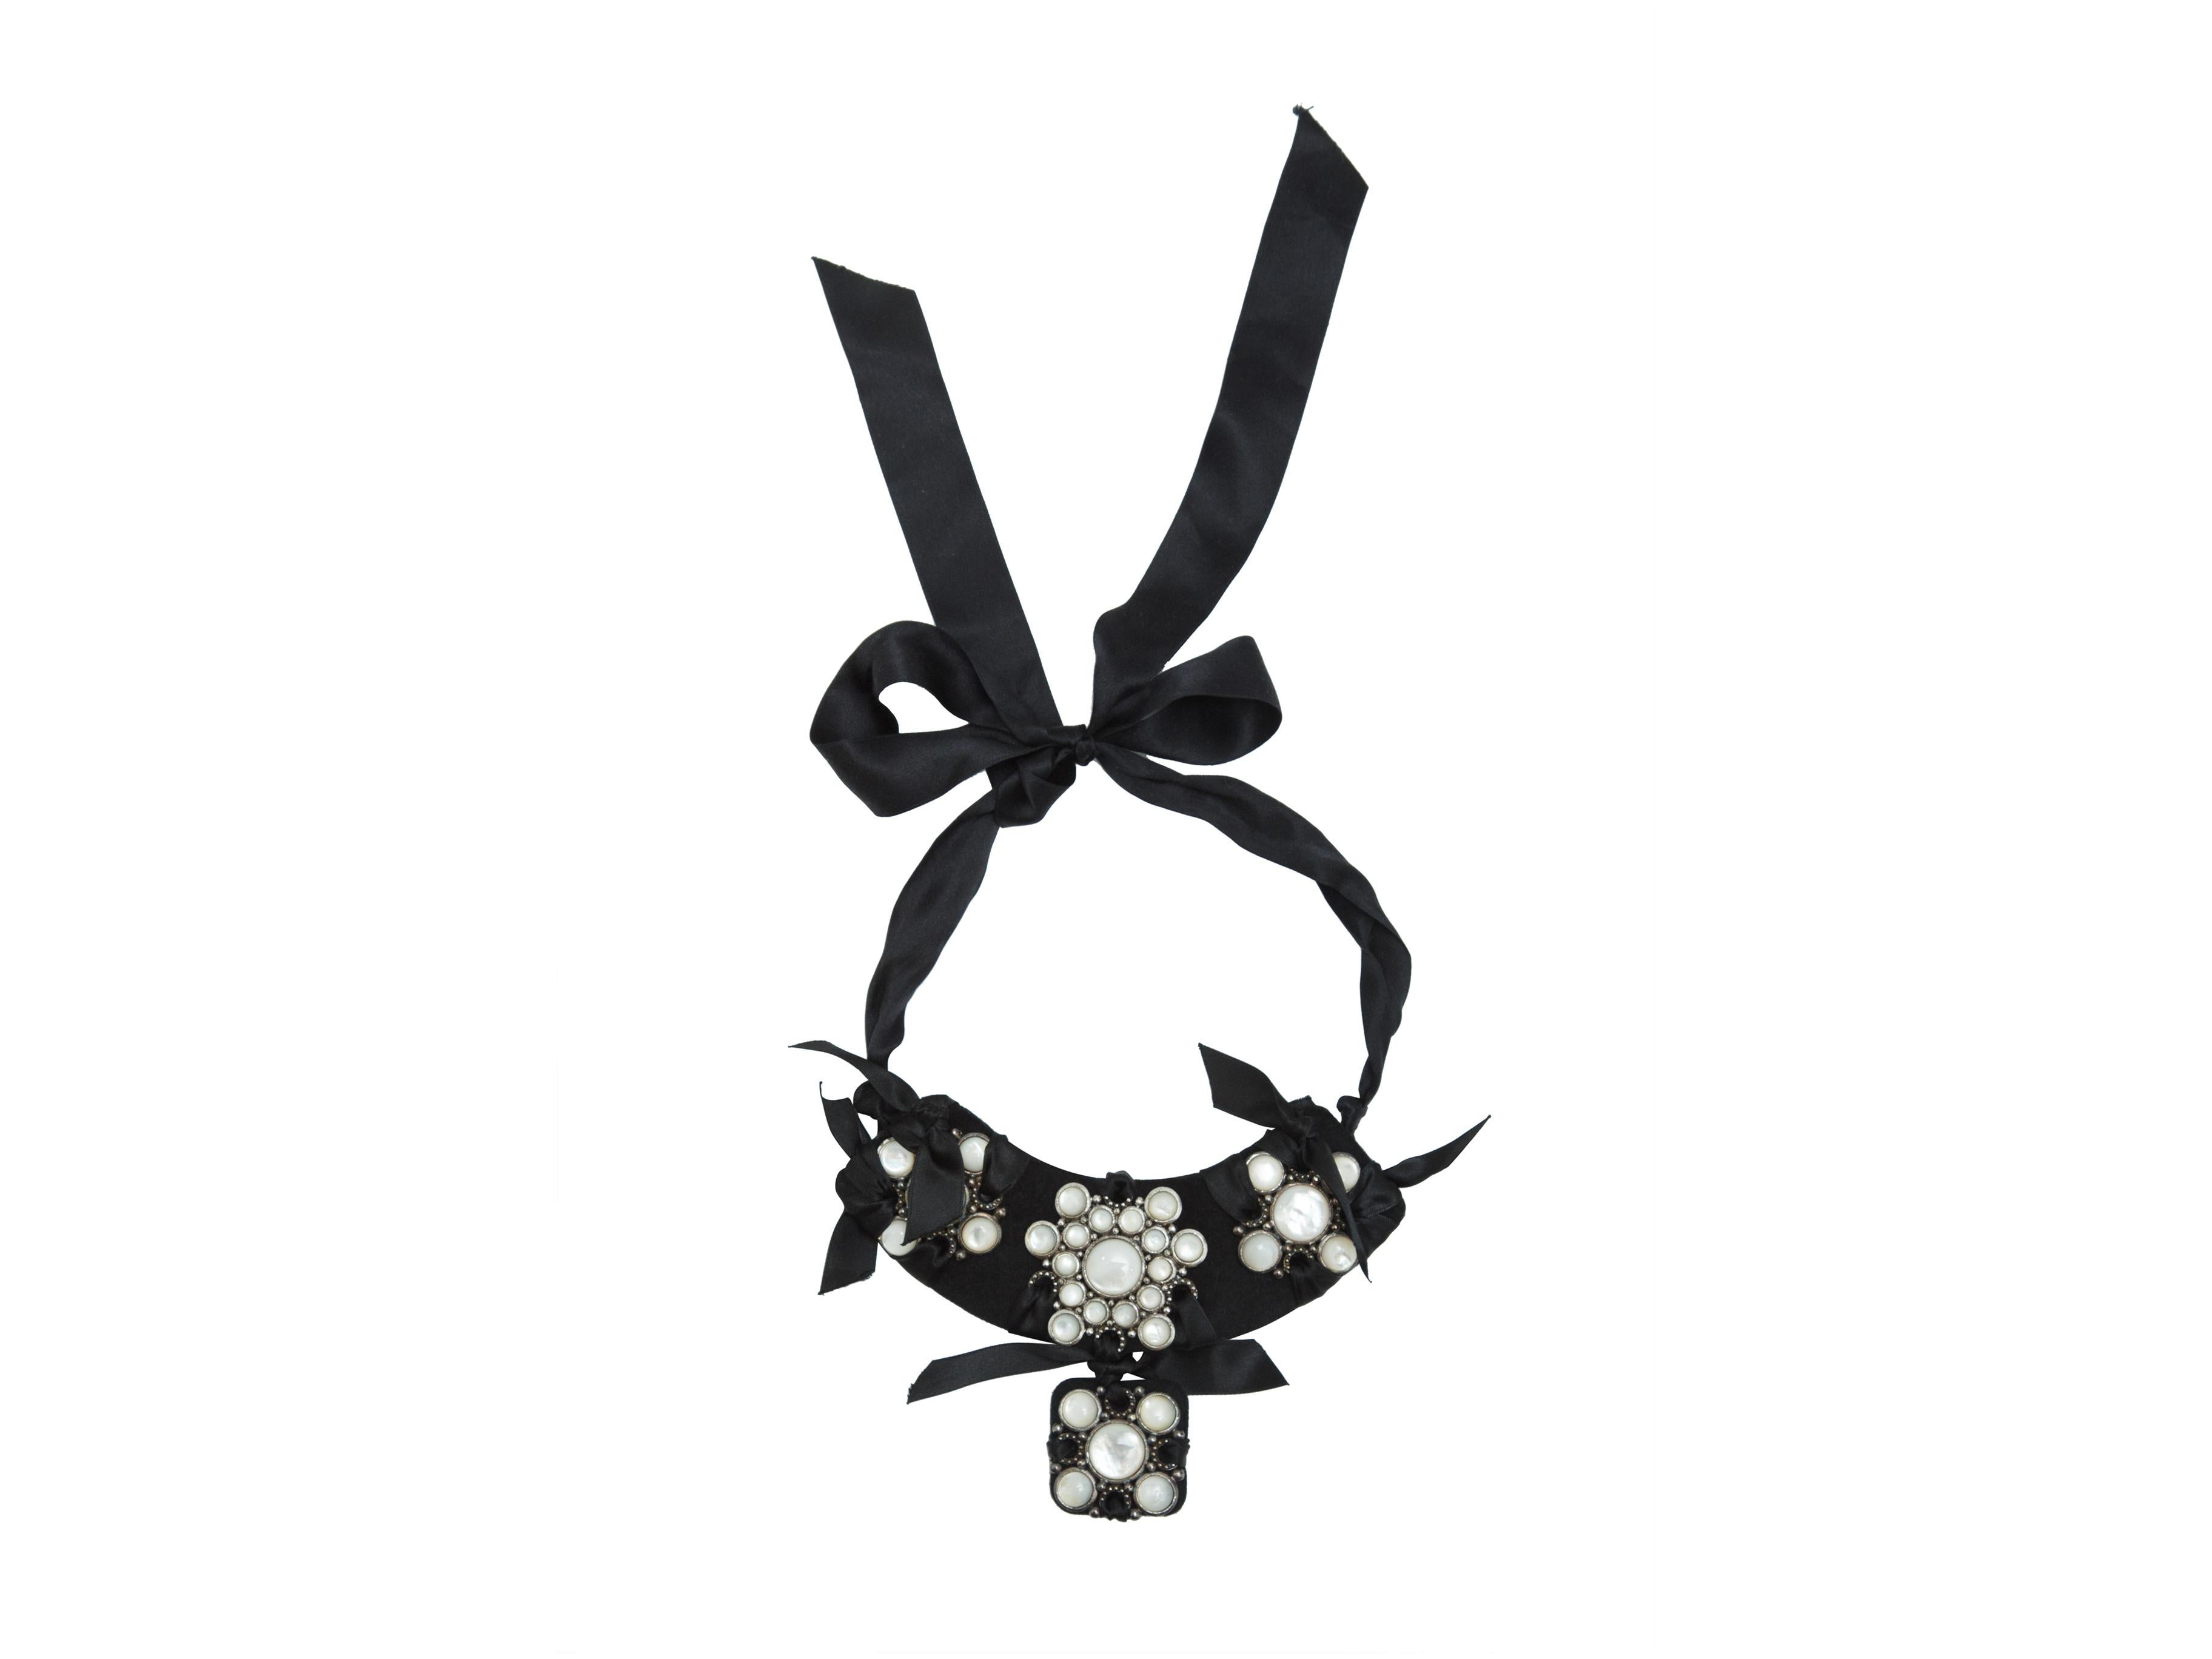 Product details: Black and white satin statement necklace by Lanvin. Stone embellishments throughout. Ribbon tie closure at back. 2